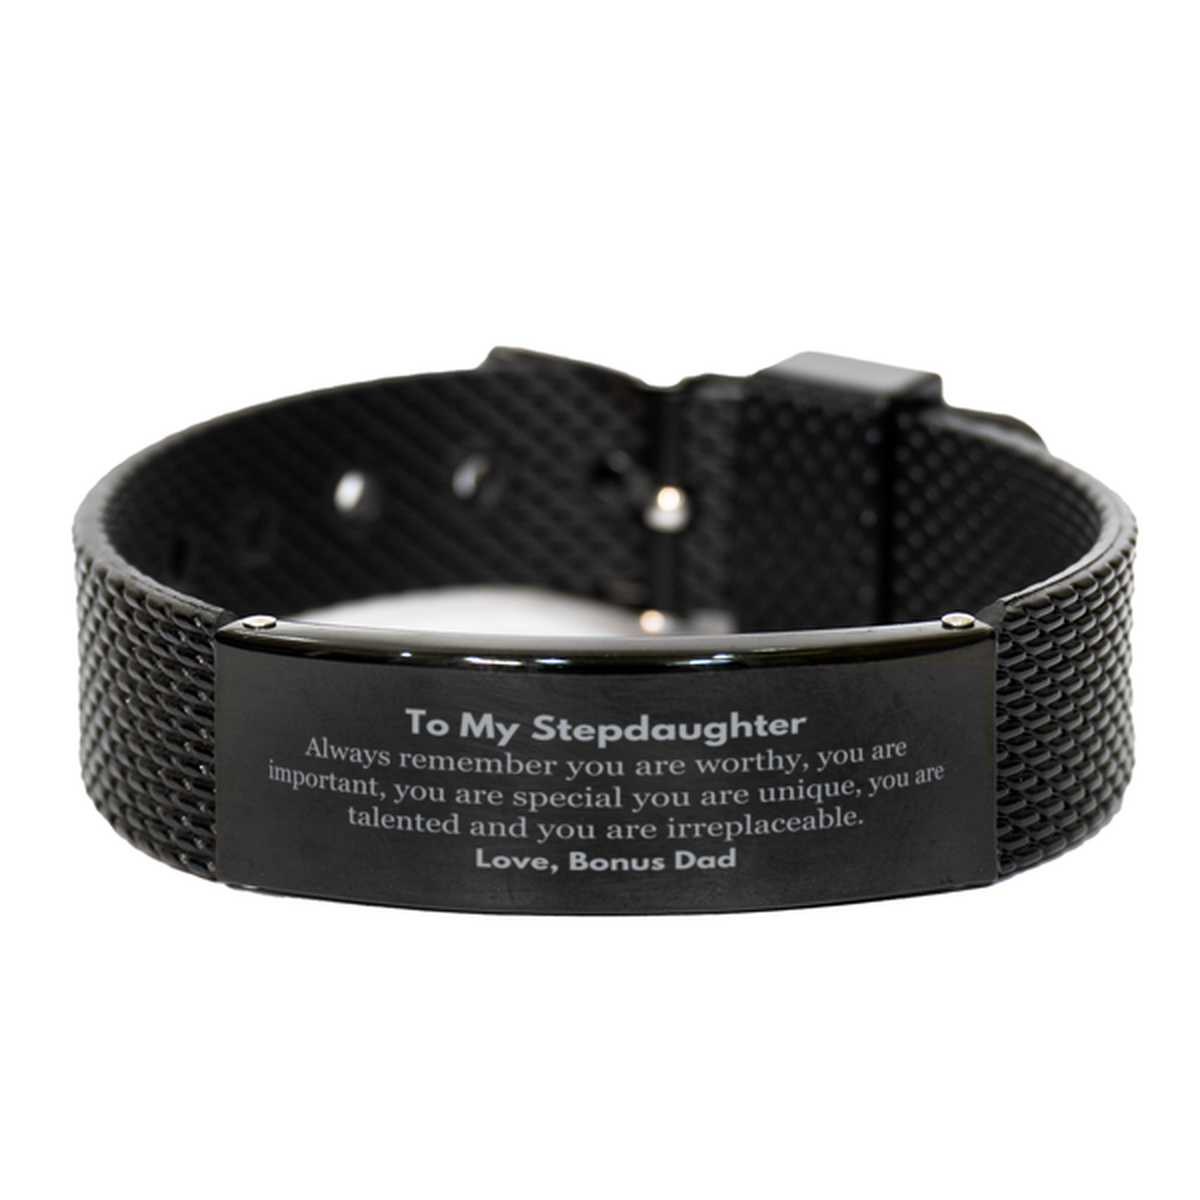 Stepdaughter Birthday Gifts from Bonus Dad, Inspirational Black Shark Mesh Bracelet for Stepdaughter Christmas Graduation Gifts for Stepdaughter Always remember you are worthy, you are important. Love, Bonus Dad